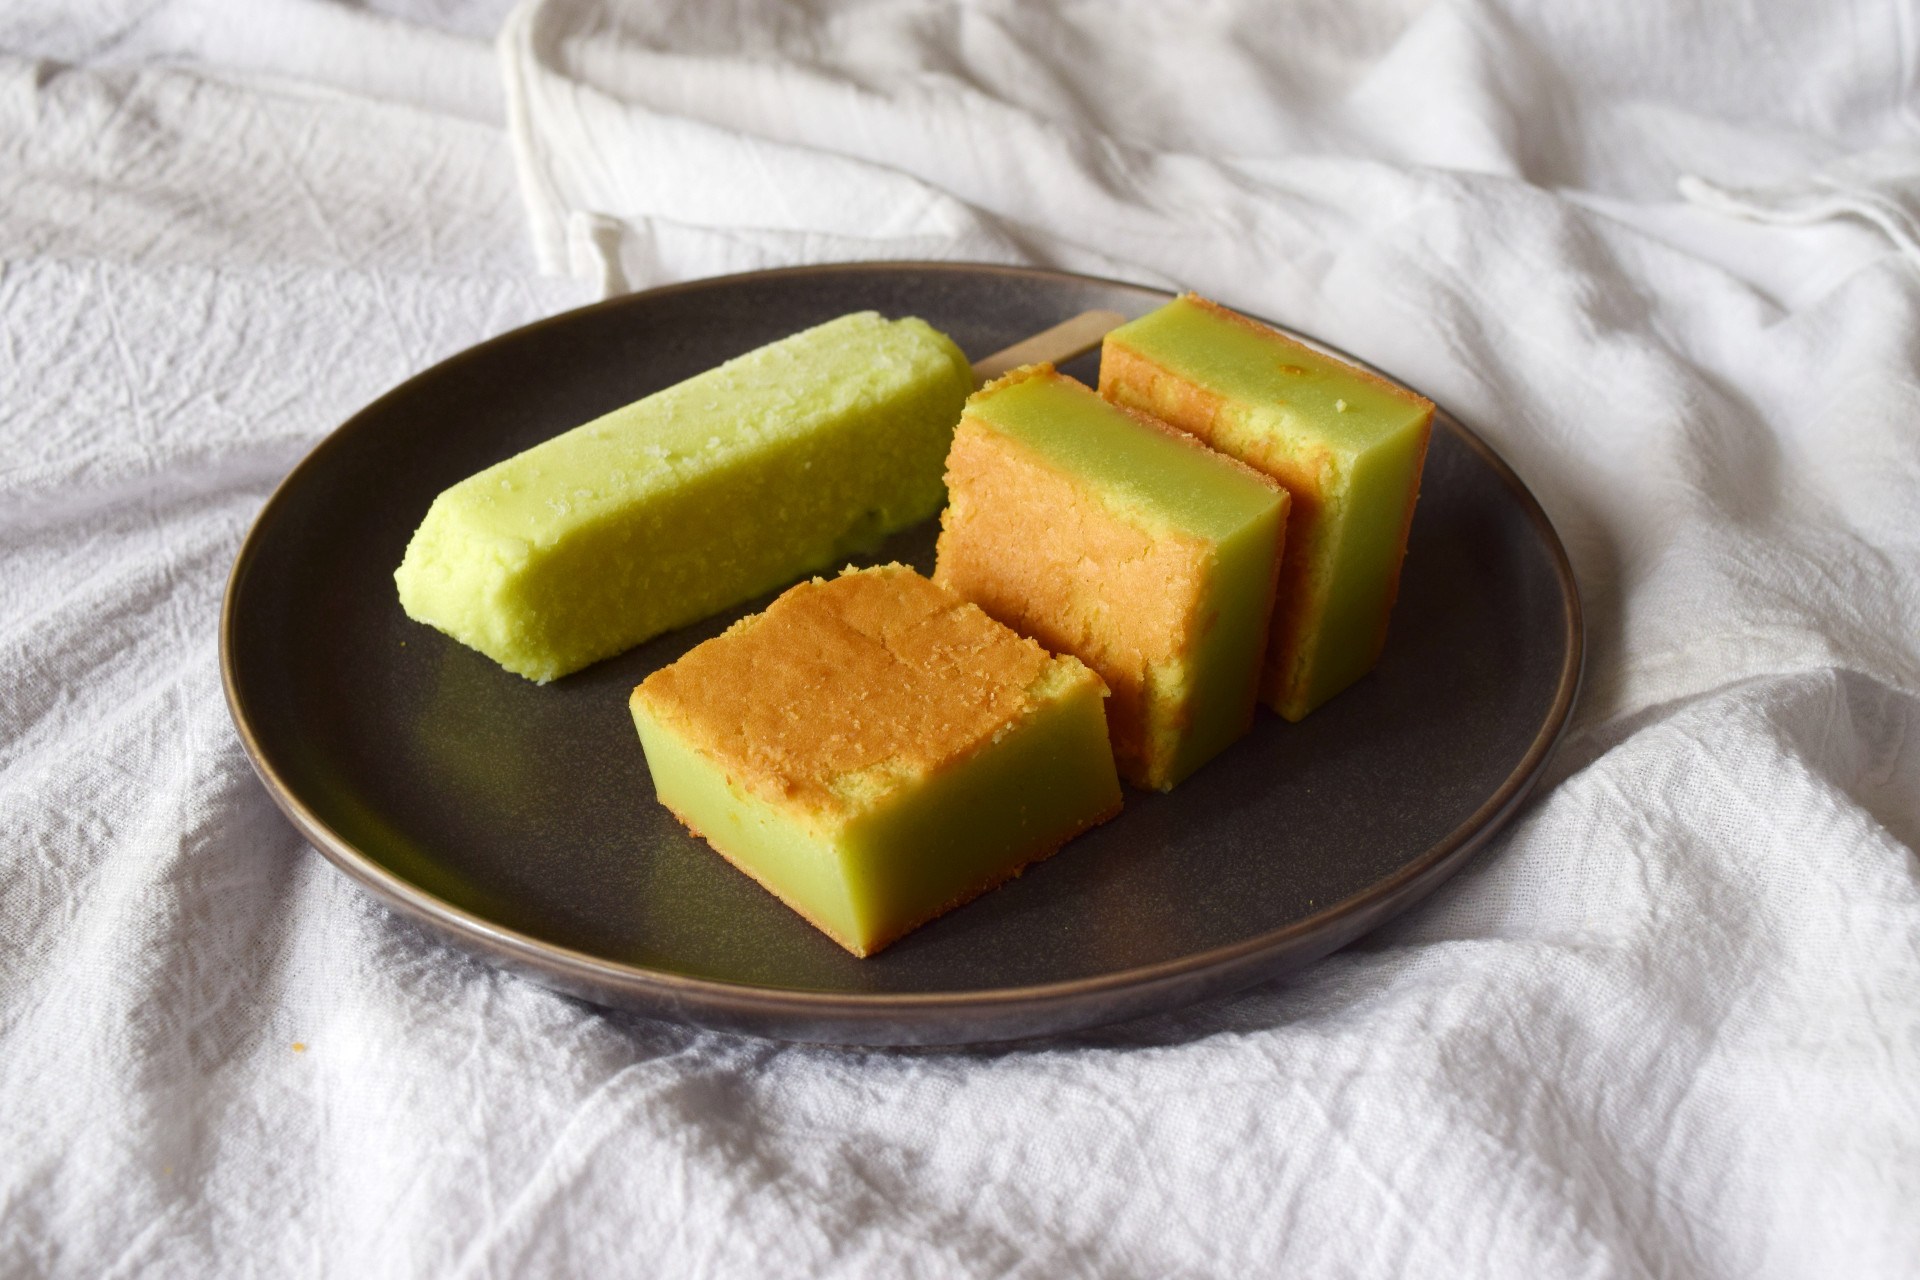 Three squares of melon-flavored mochi on a plate, next to a melon popsicle with the same pale green color.